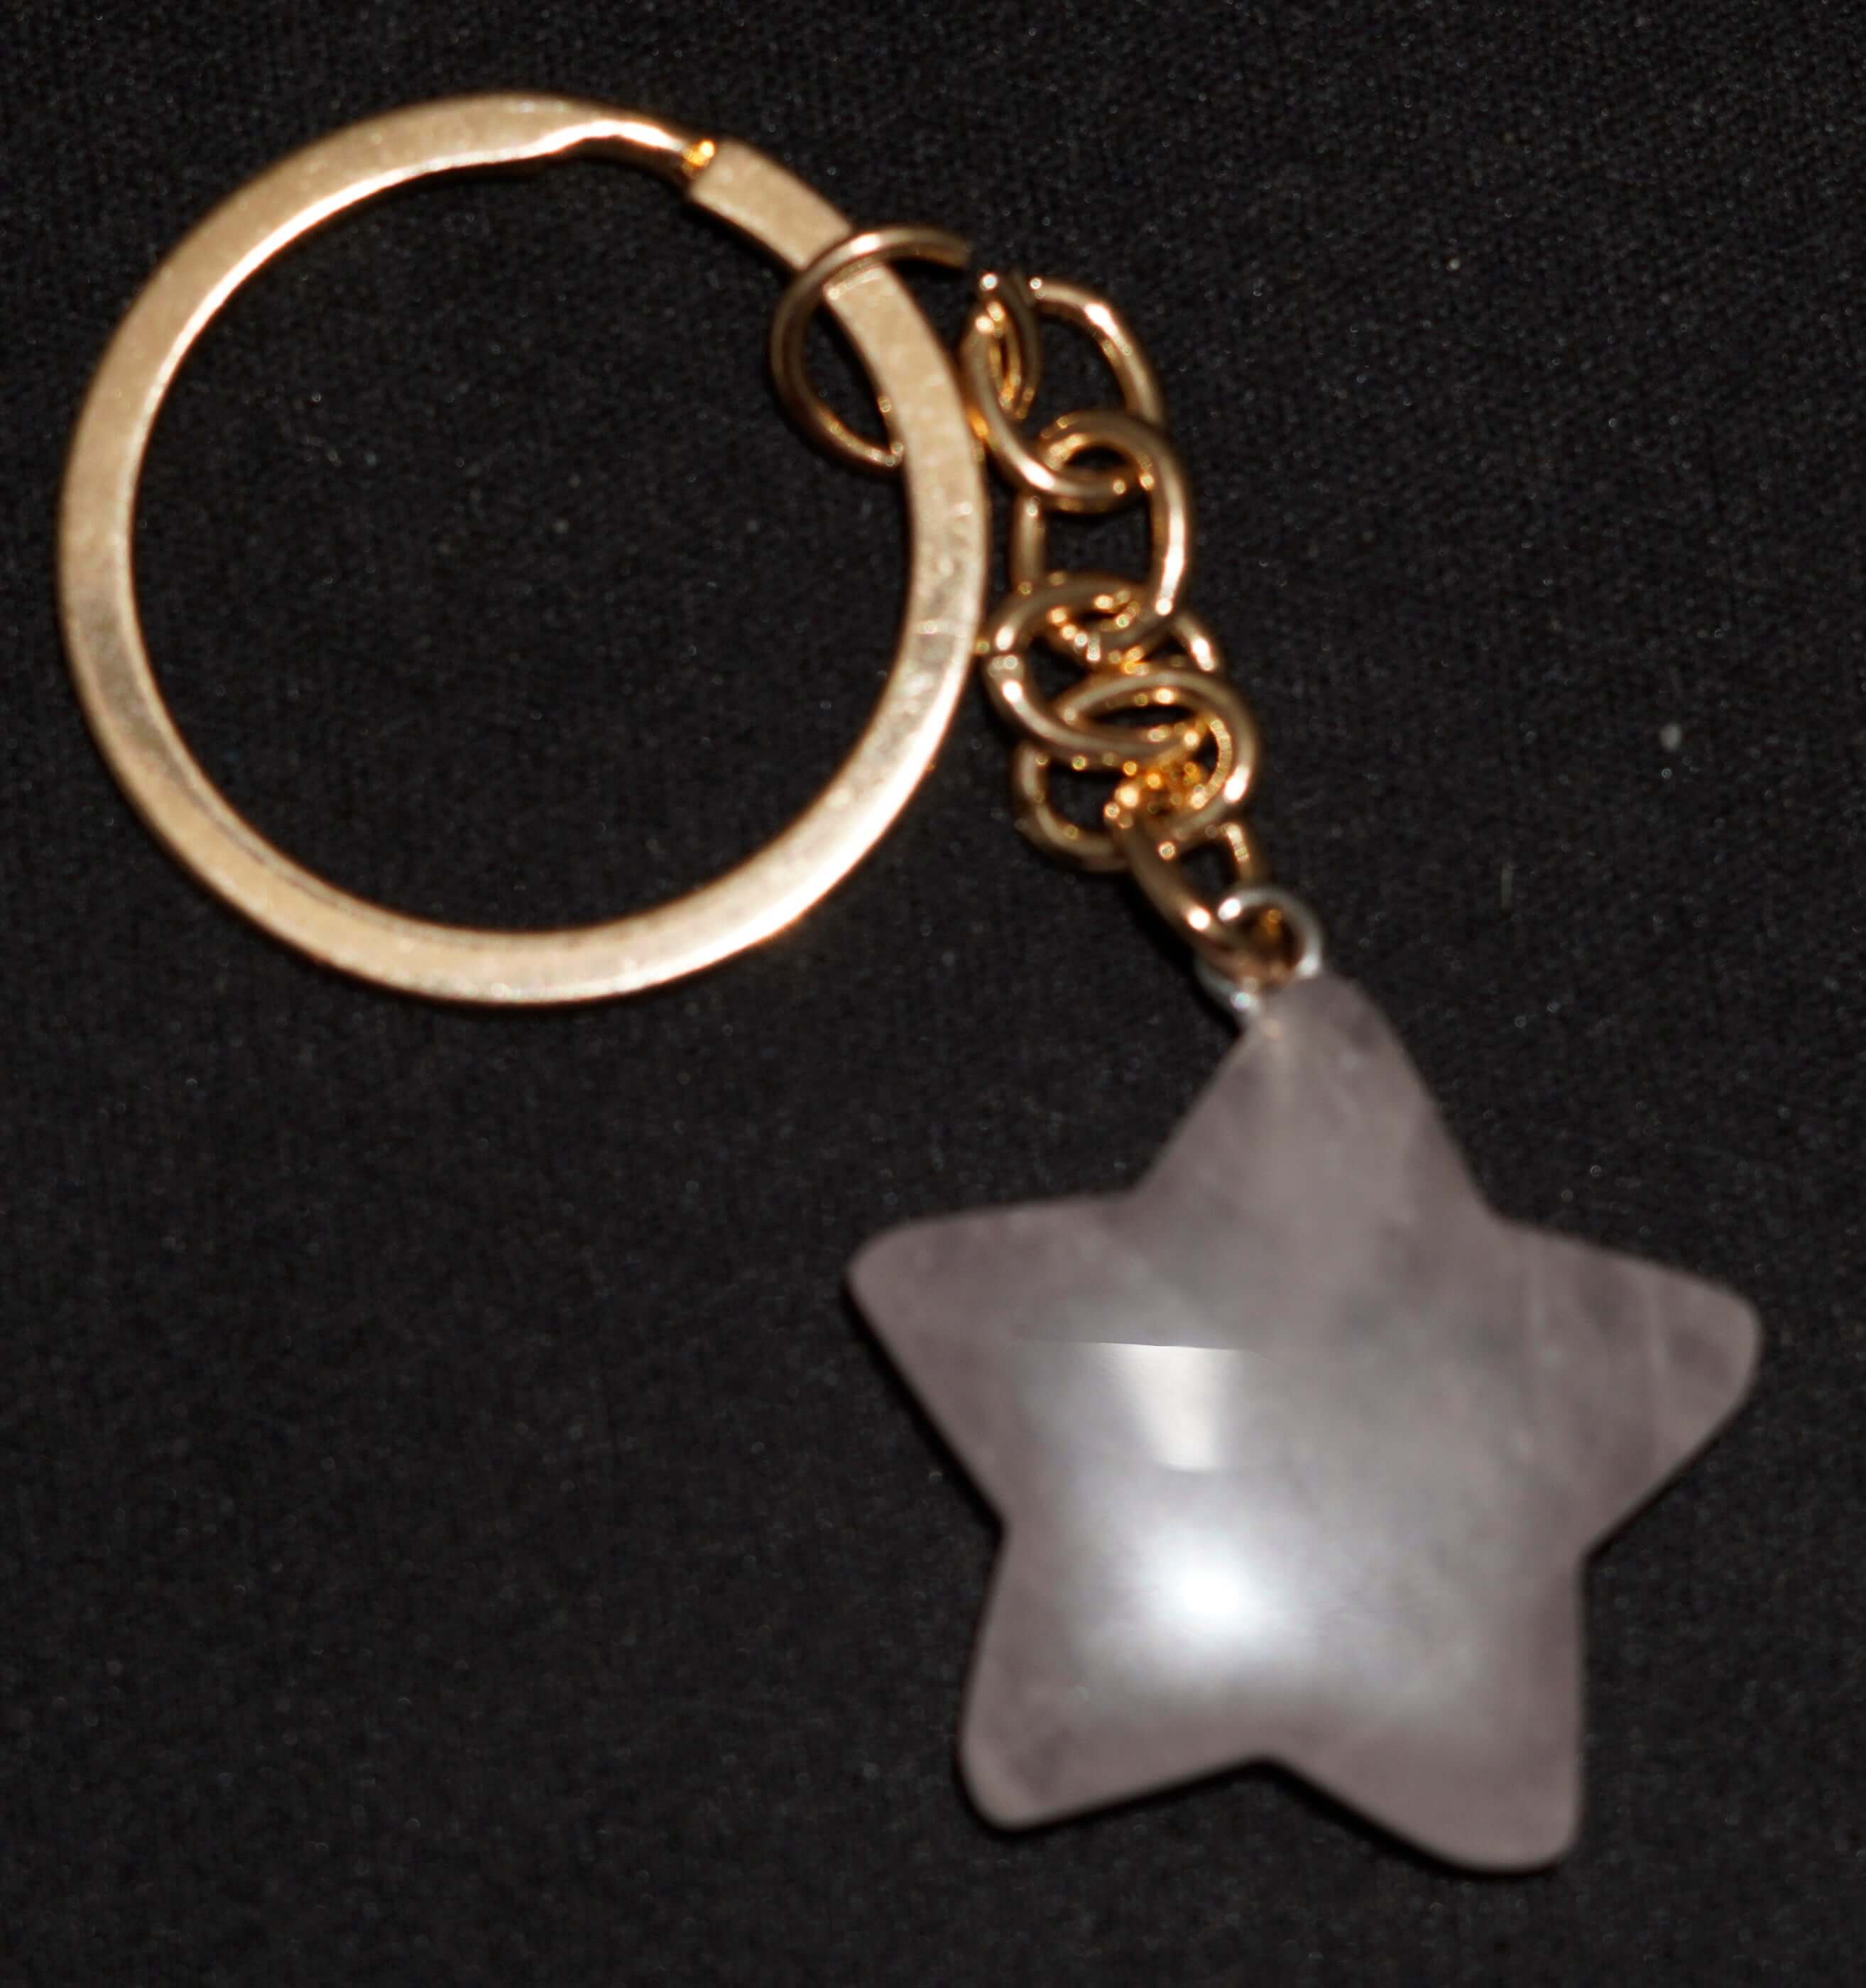 5 Pointed Star Crystal Keychains
Acid Secs Productions Inc.
5 Pointed Star Crystal Keychains Note: These are Local Canadian Stock. They will be packaged extremely safely and delivered by Canada Post/UPS/DHL/Other Local Couriers.
agate, amethyst, ammolite, angel, AOP, apatite, beads, black tourmaline, Blue Crystal, blue flash, blue fluorite, blue kyanite, blue smelting, blue vein, Blue vein stone, citrine, cluster, Collectable Items, collection, cool design, Crystal, crystal ball, Crystal Pipe, crystal pipes